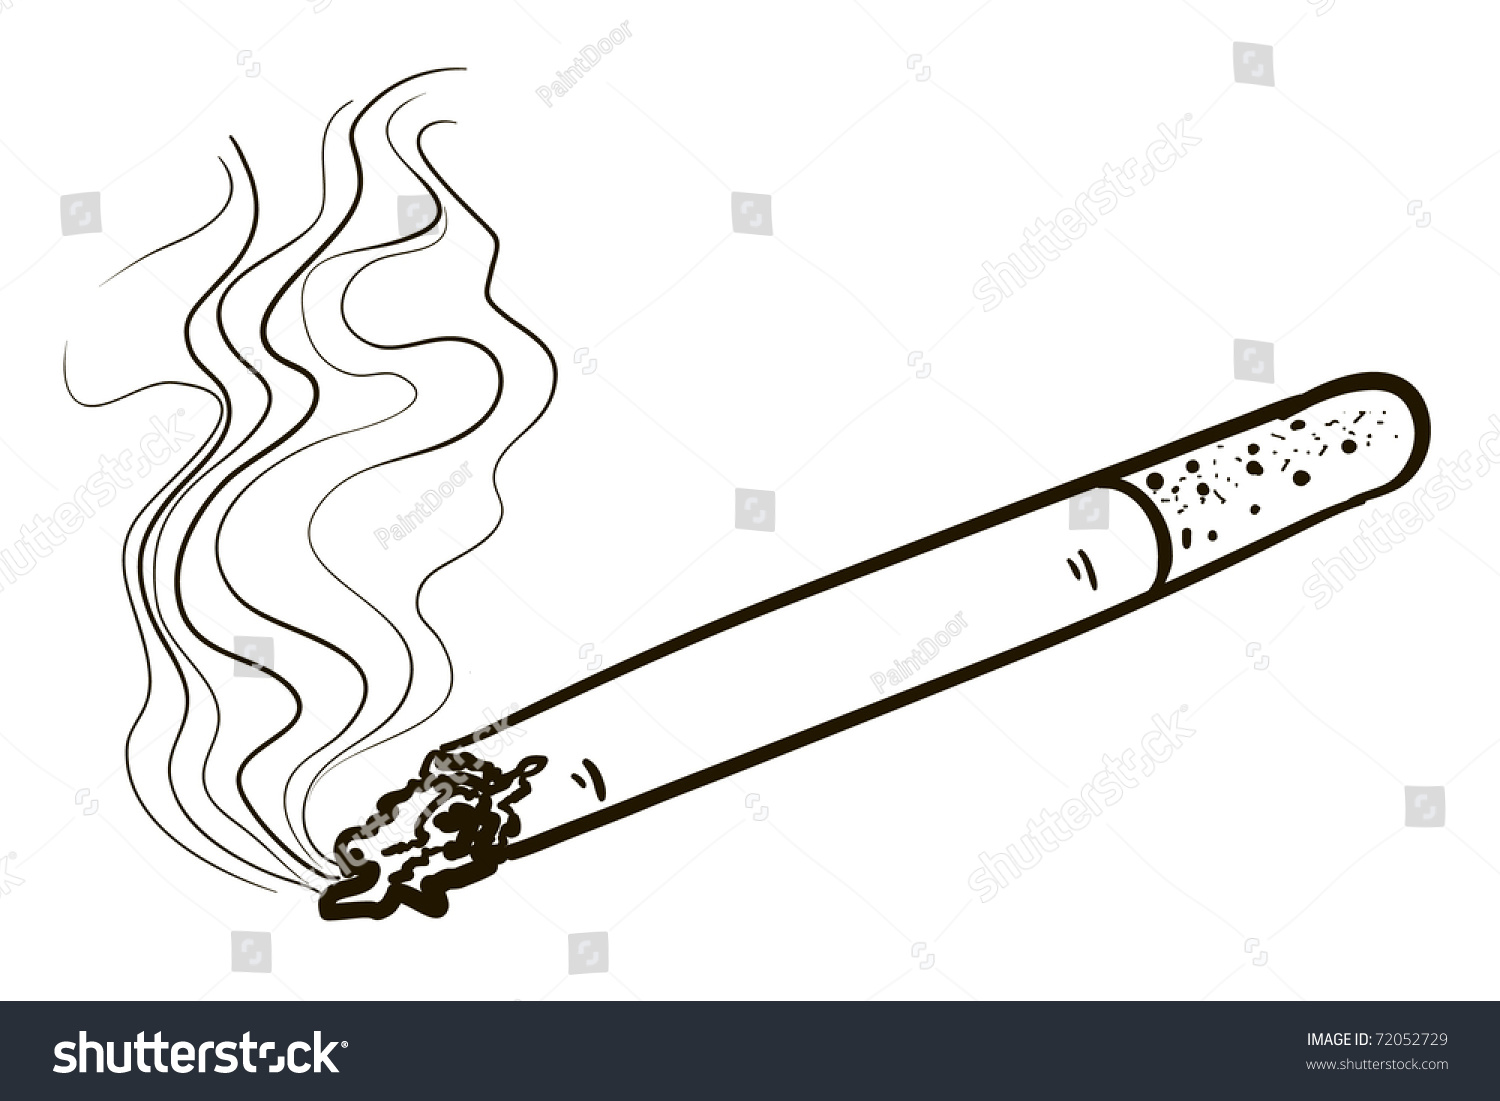 Smoking Cigarette Childrens Sketch Stock Vector (Royalty Free) 72052729